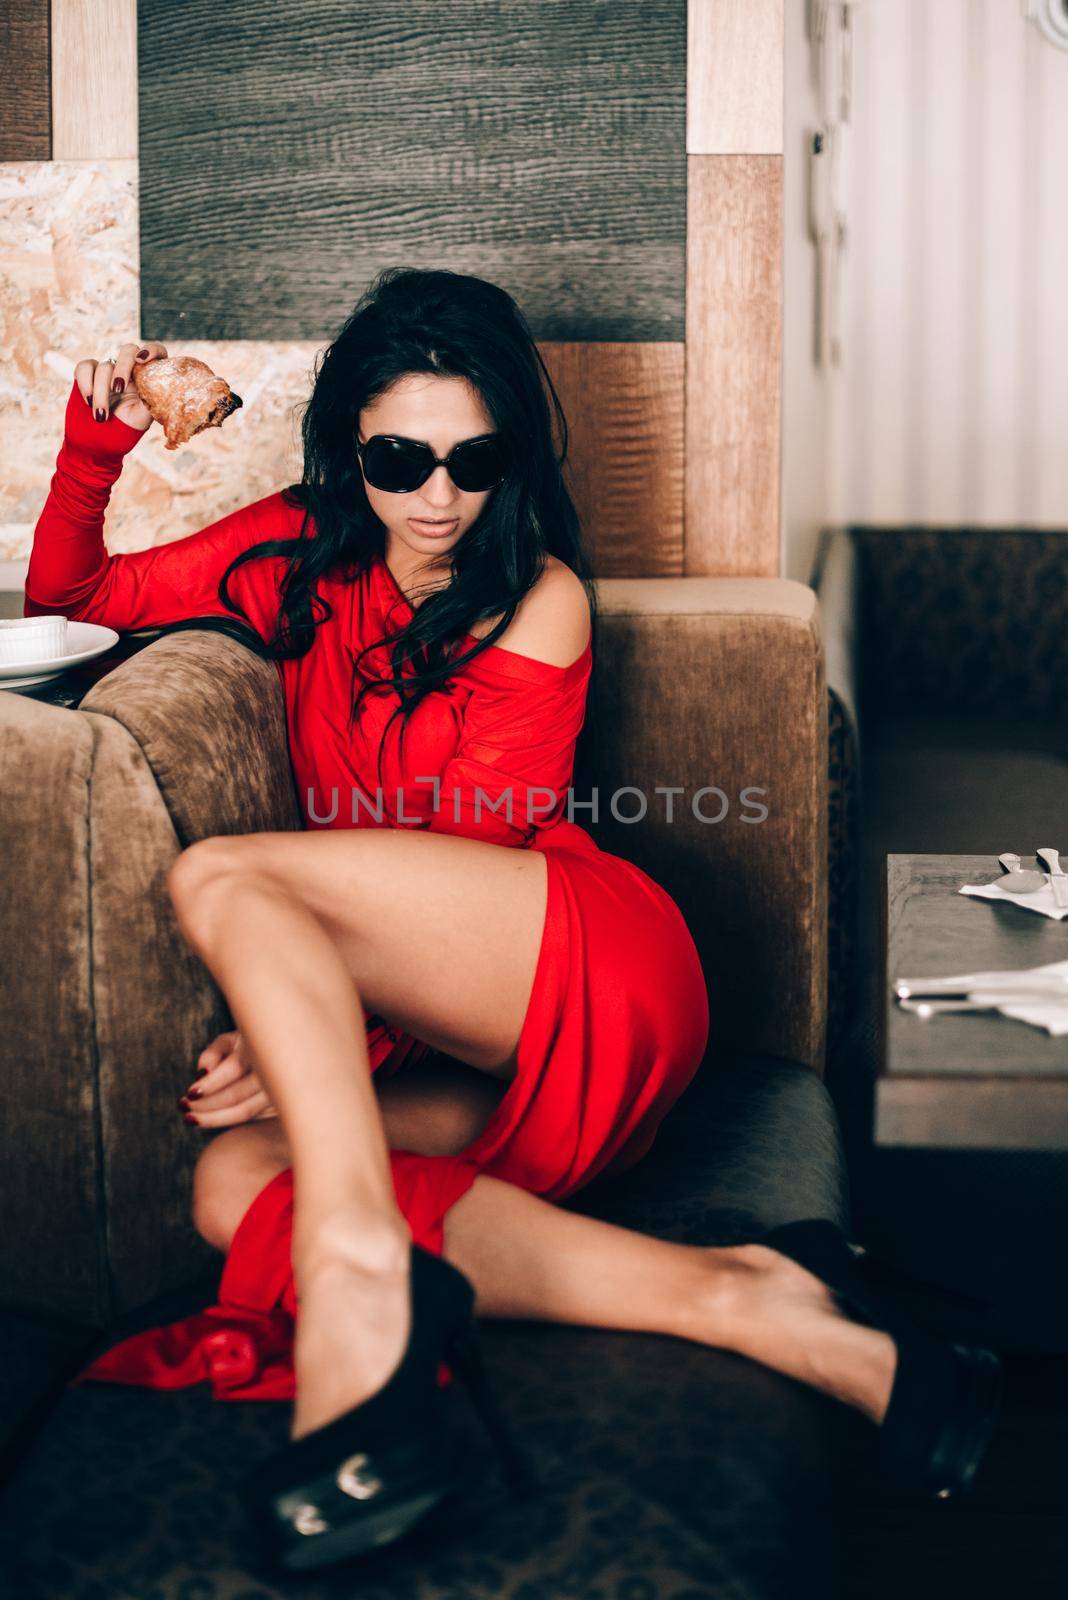 sexy woman in a red dress with black hair eats a croissant. temptation with food. attractive legs. obsession with red. Selective focus